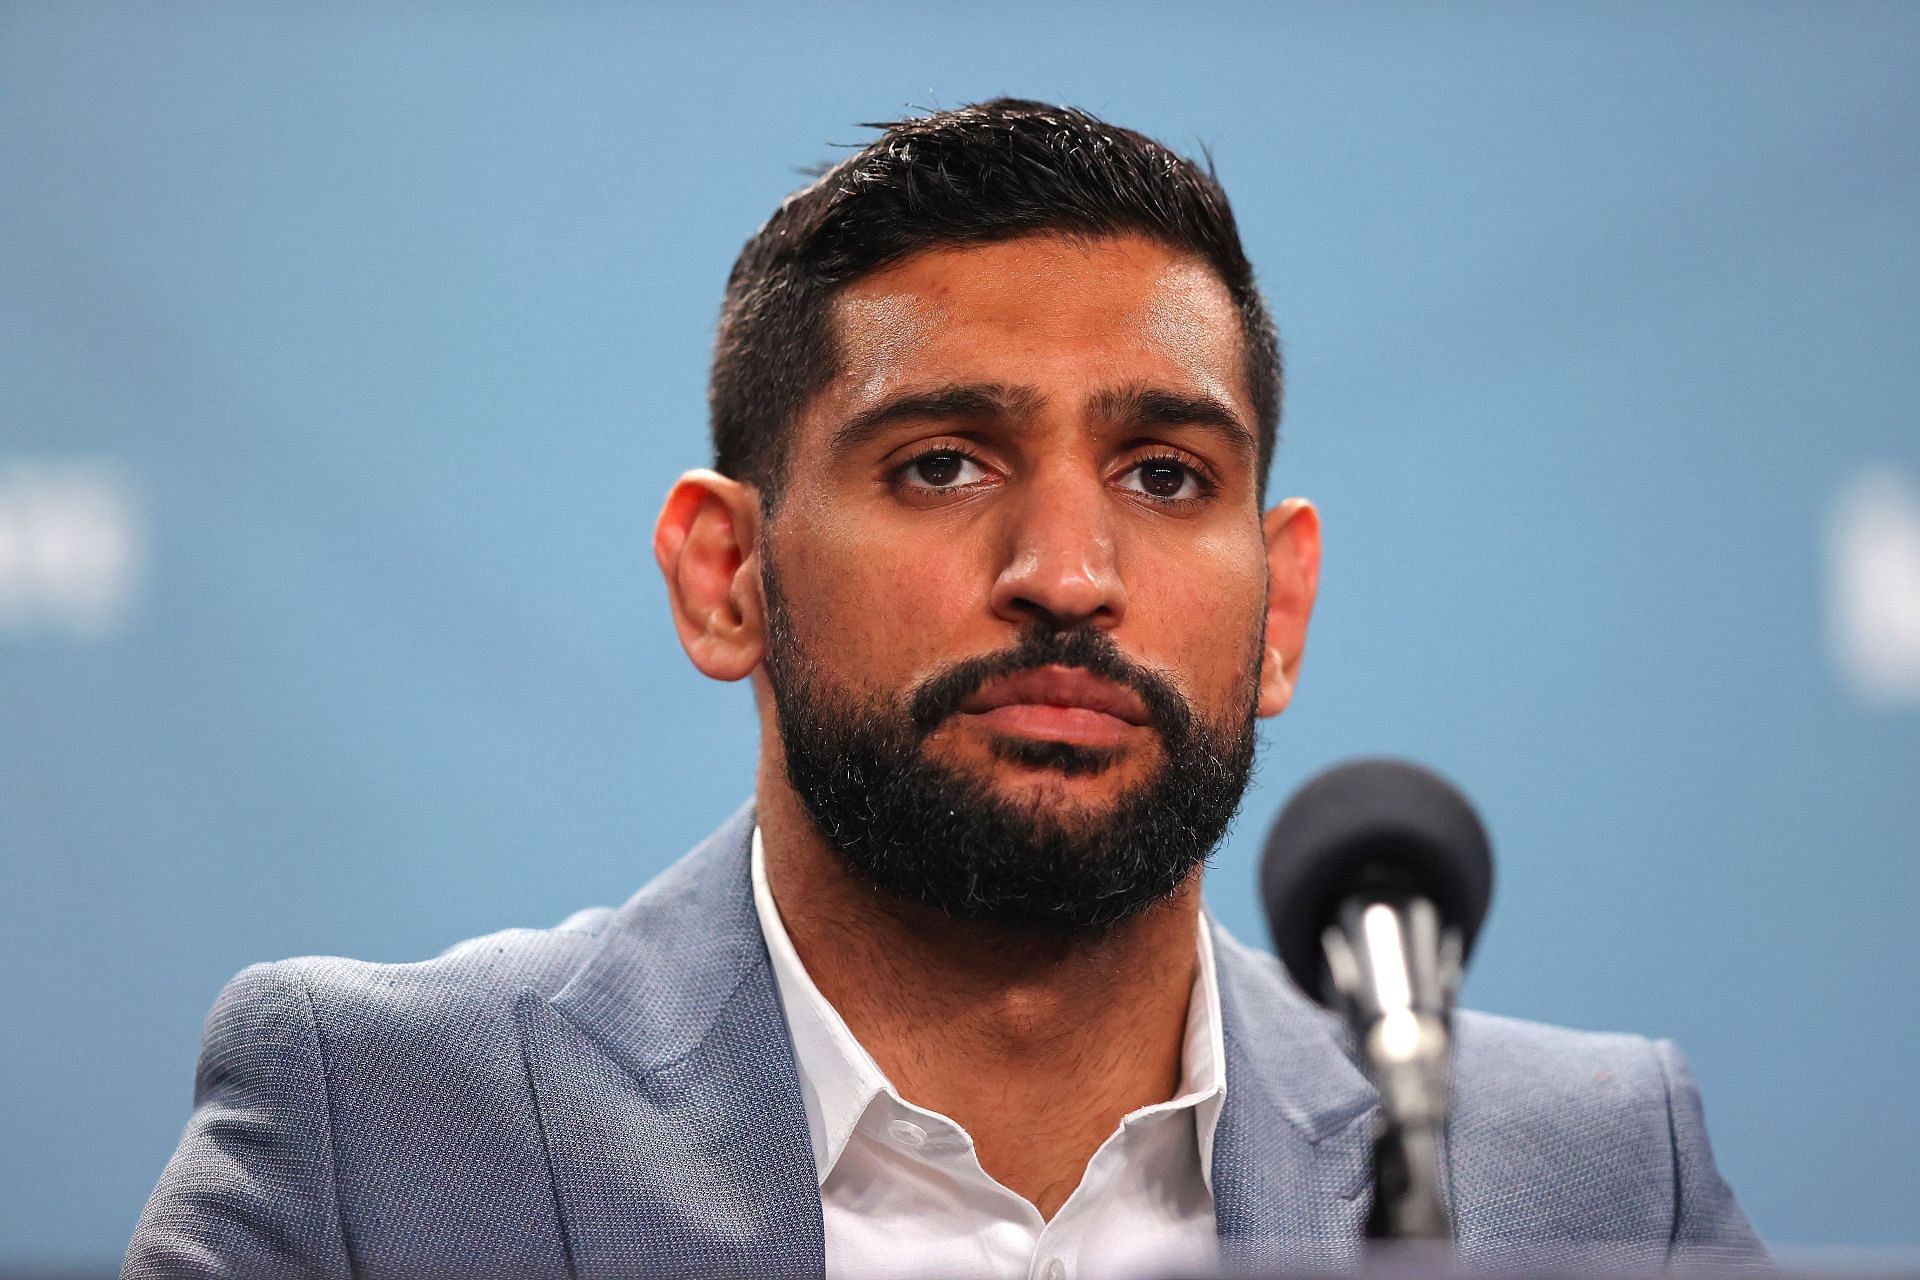 Amir Khan (in pic) may be done in the ring, according to Johnny Nelson.